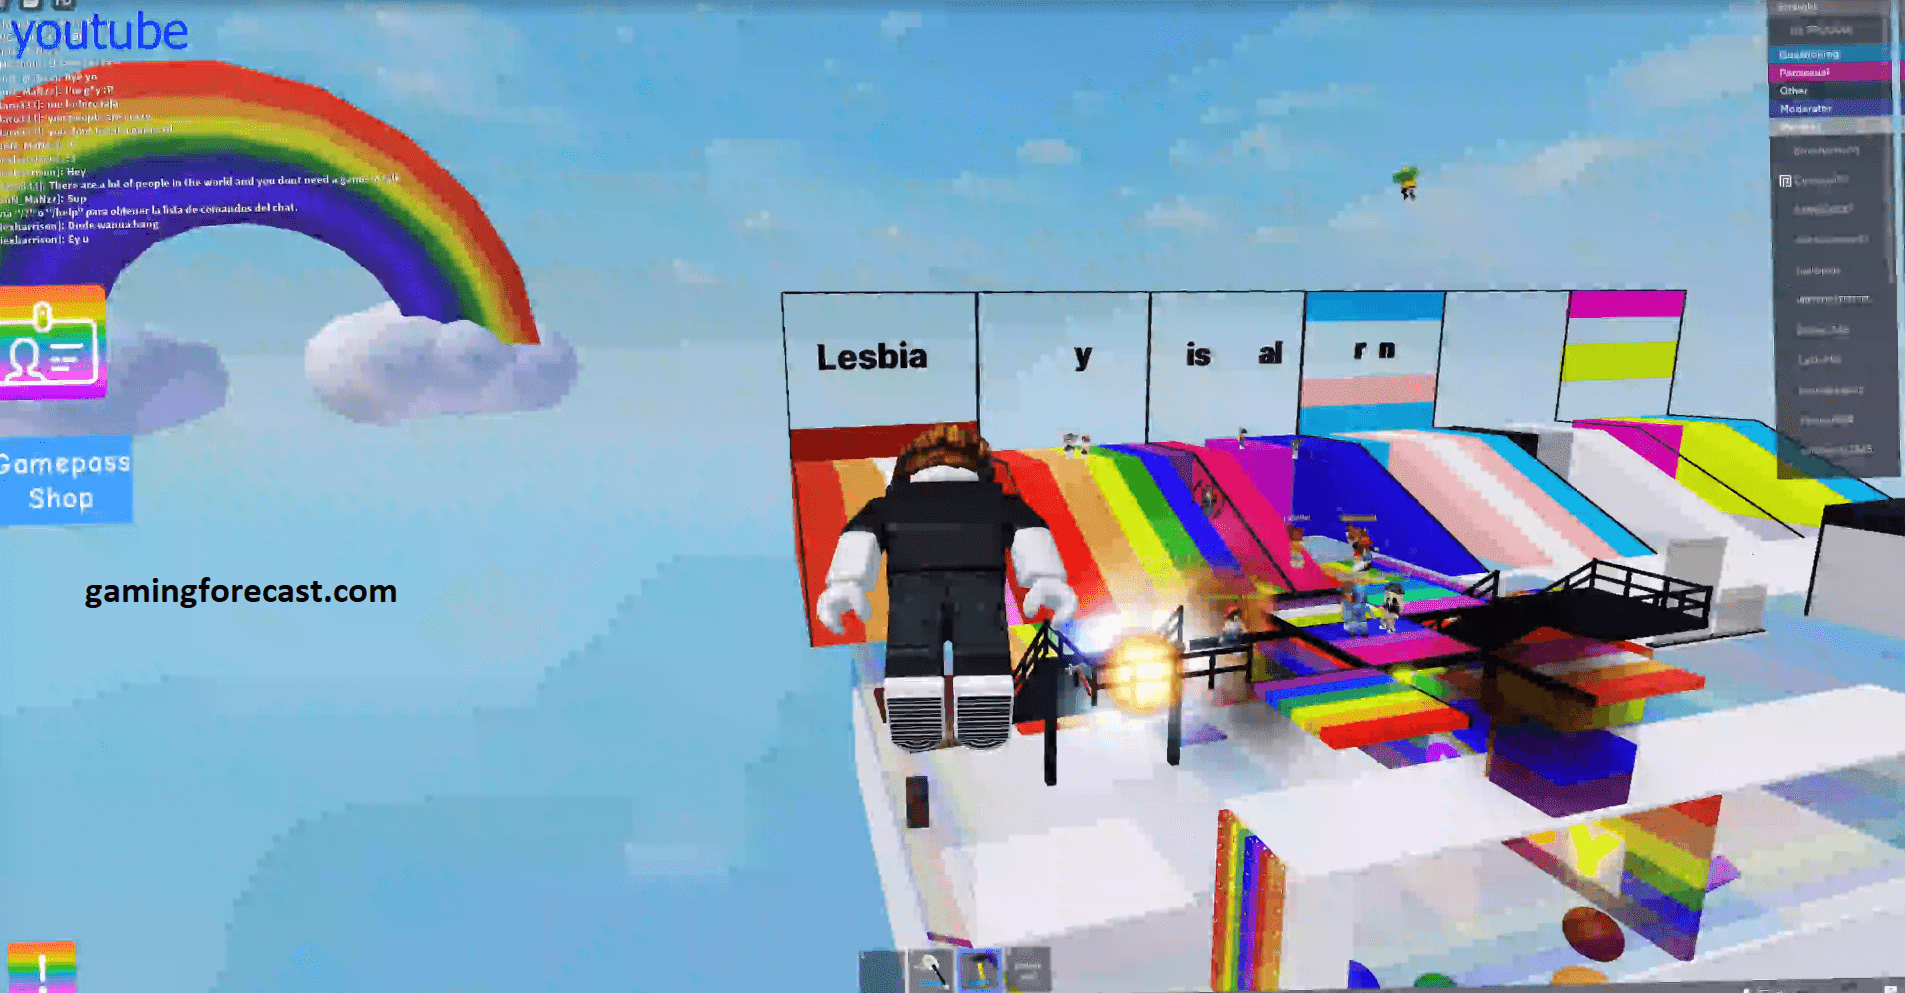 Roblox Hack Download Pc Destroy Lobby Fly Aimbot Scripts 2021 Gaming Forecast Download Free Online Game Hacks - roblox cracked check